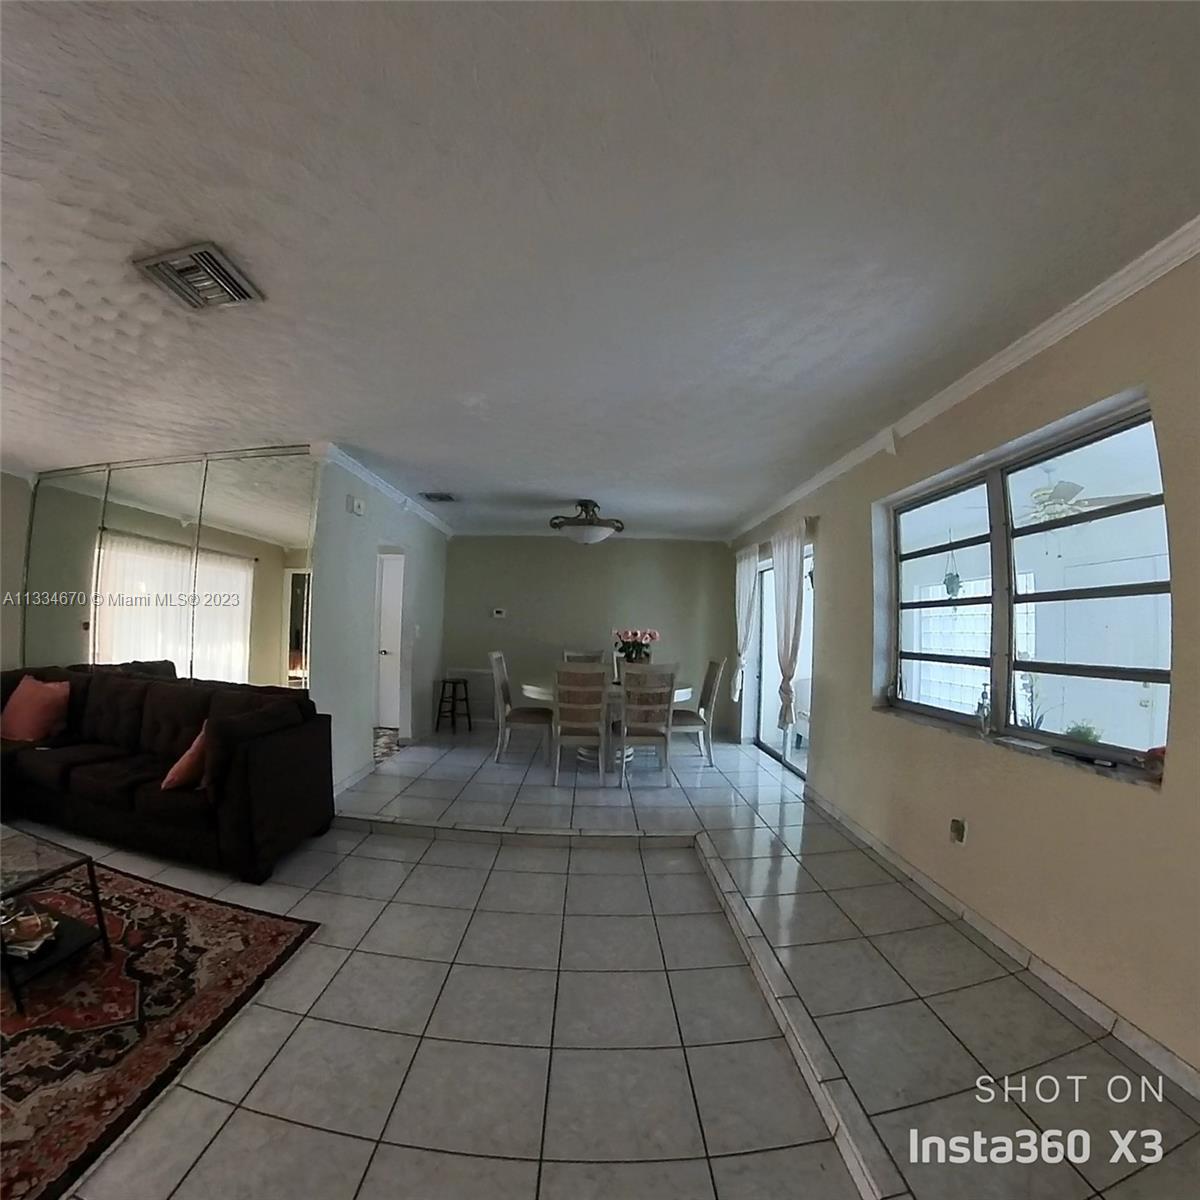 Photo 43 of   in Miami Springs - MLS A11334670